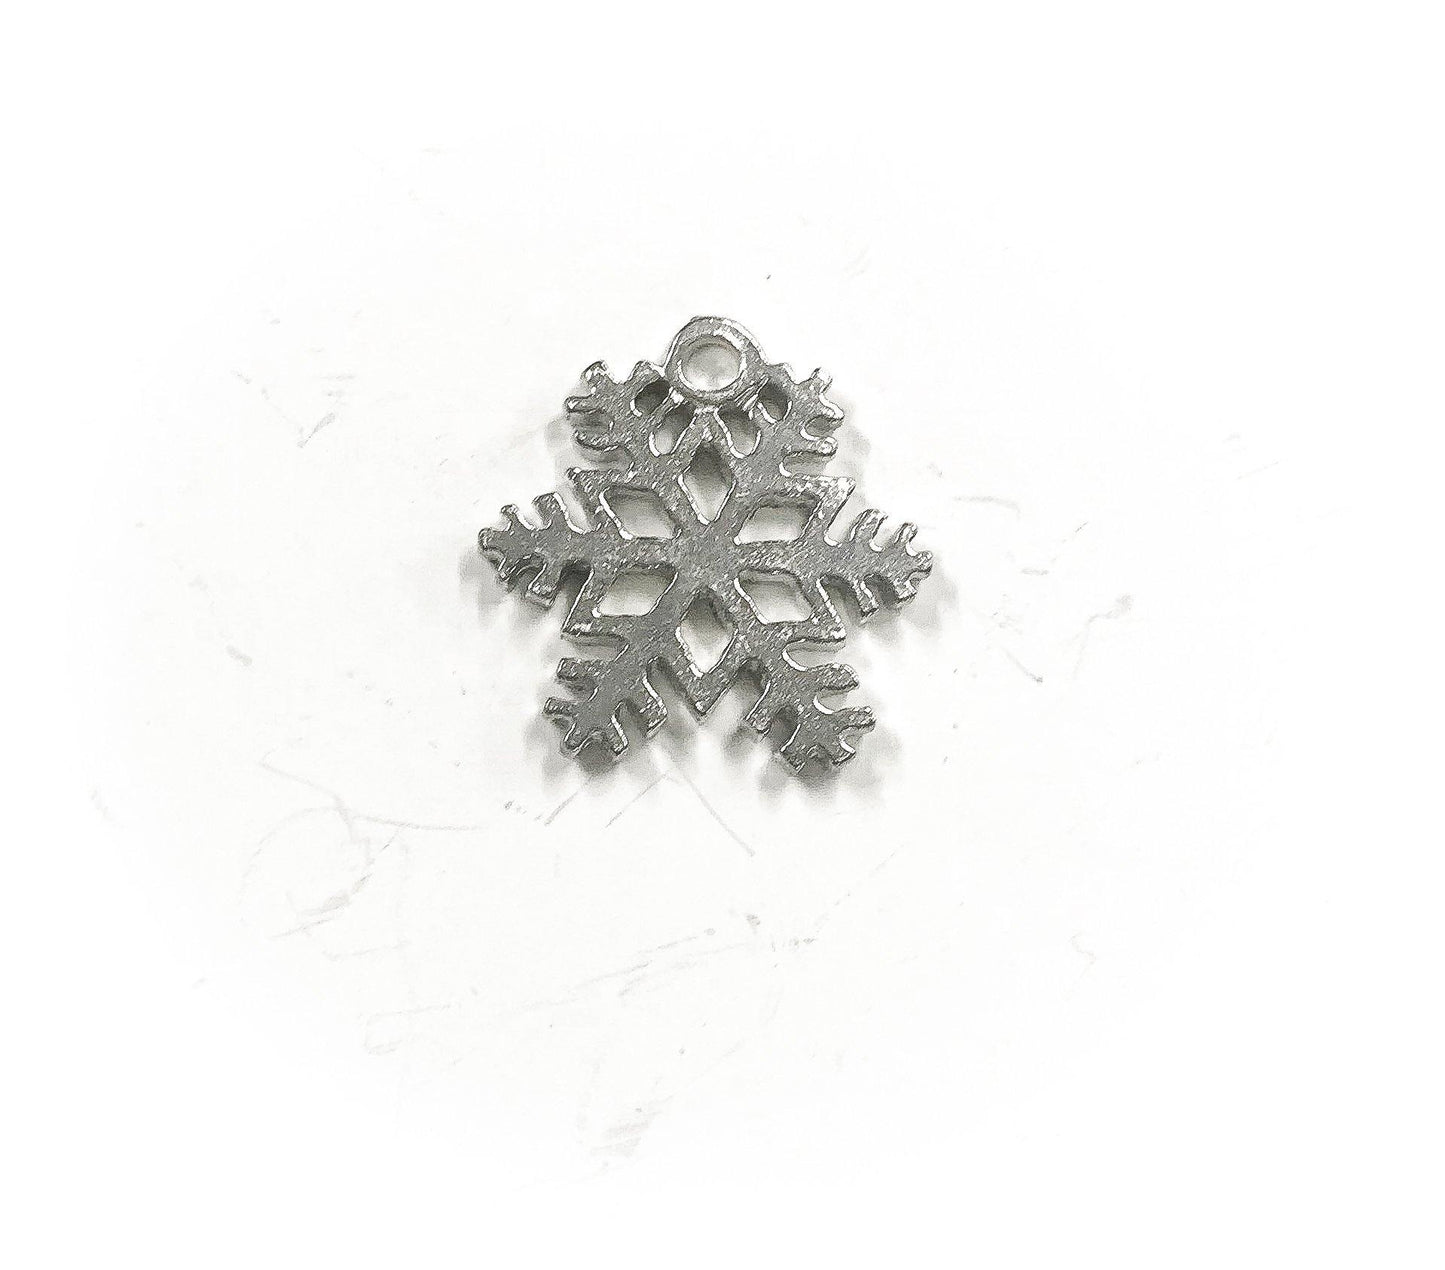 Handmade Snowflake Pewter Pendant Necklaces - House of Morgan Pewter